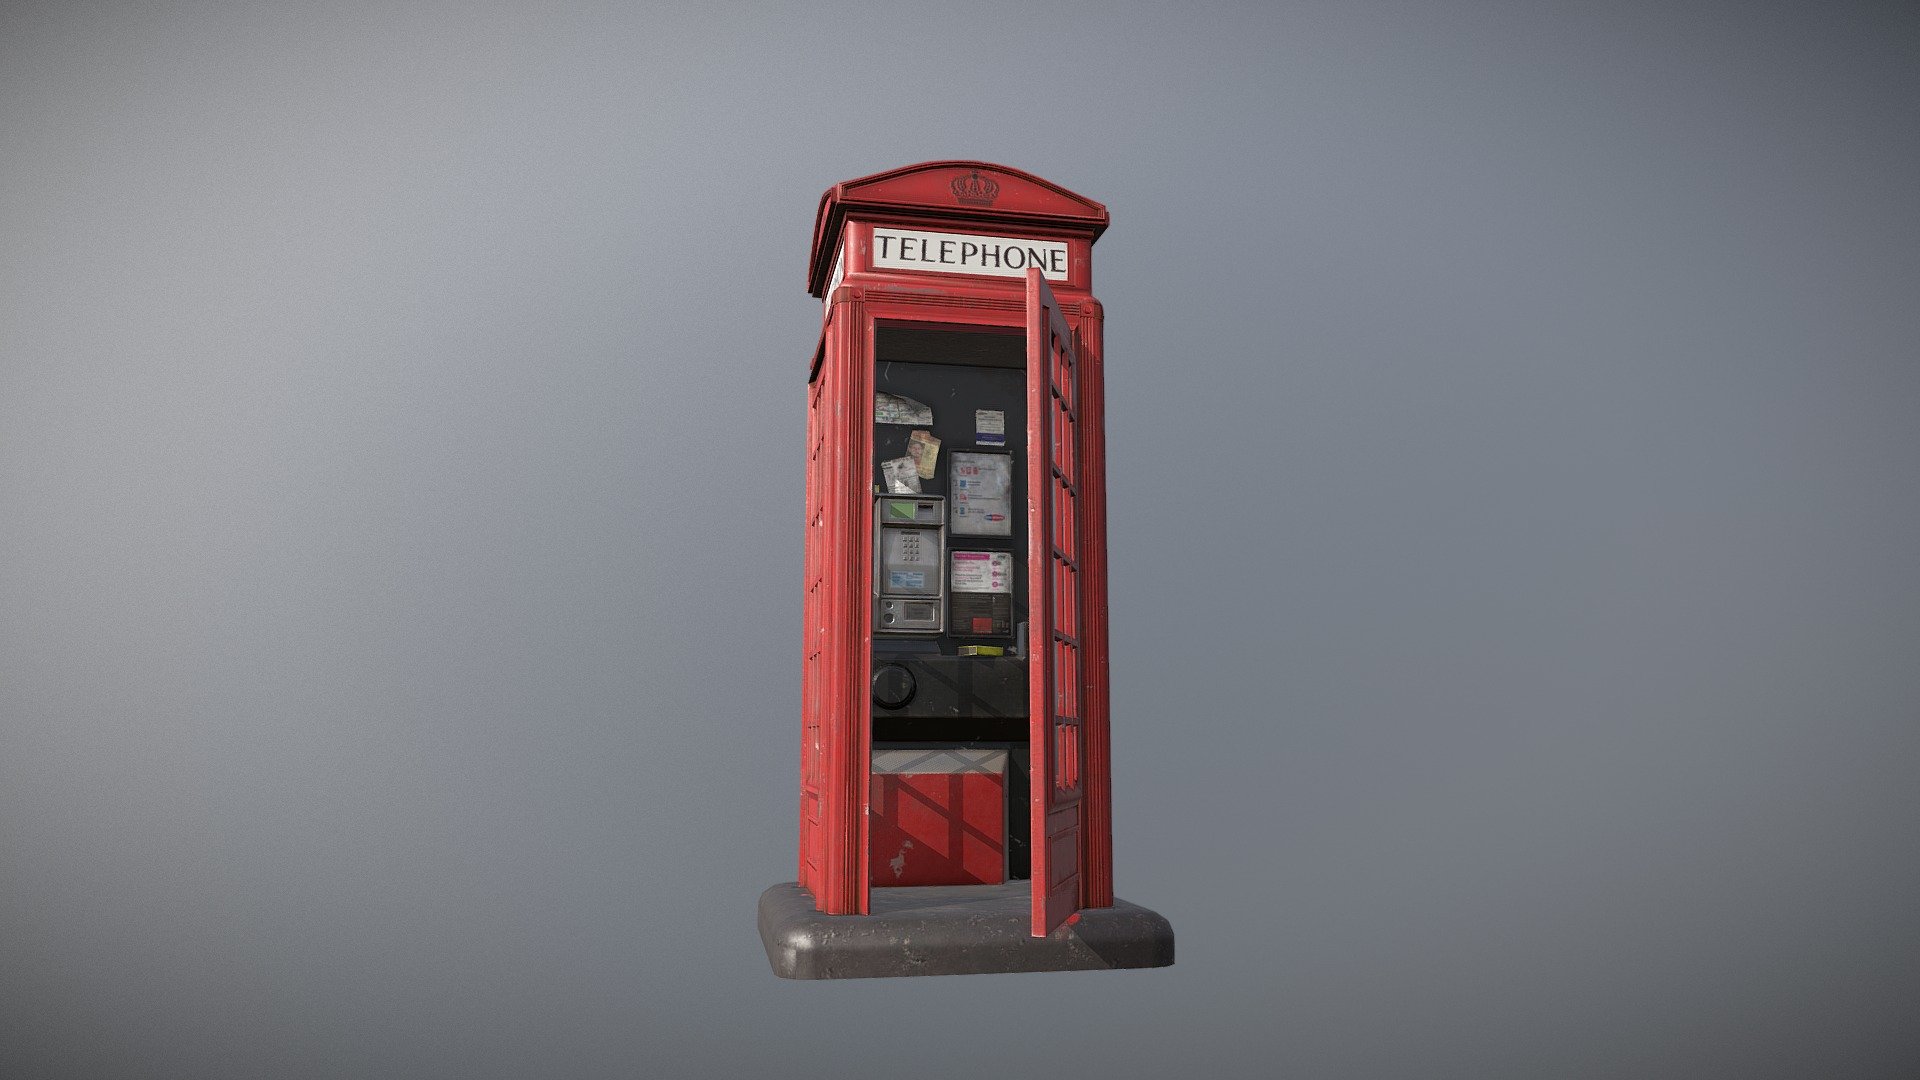 Used softwares: 

3Ds max for modeling 

Substance painter for texturing 

rendered in substance painter - phone booth - 3D model by peyvand (@peyvand_a91) 3d model